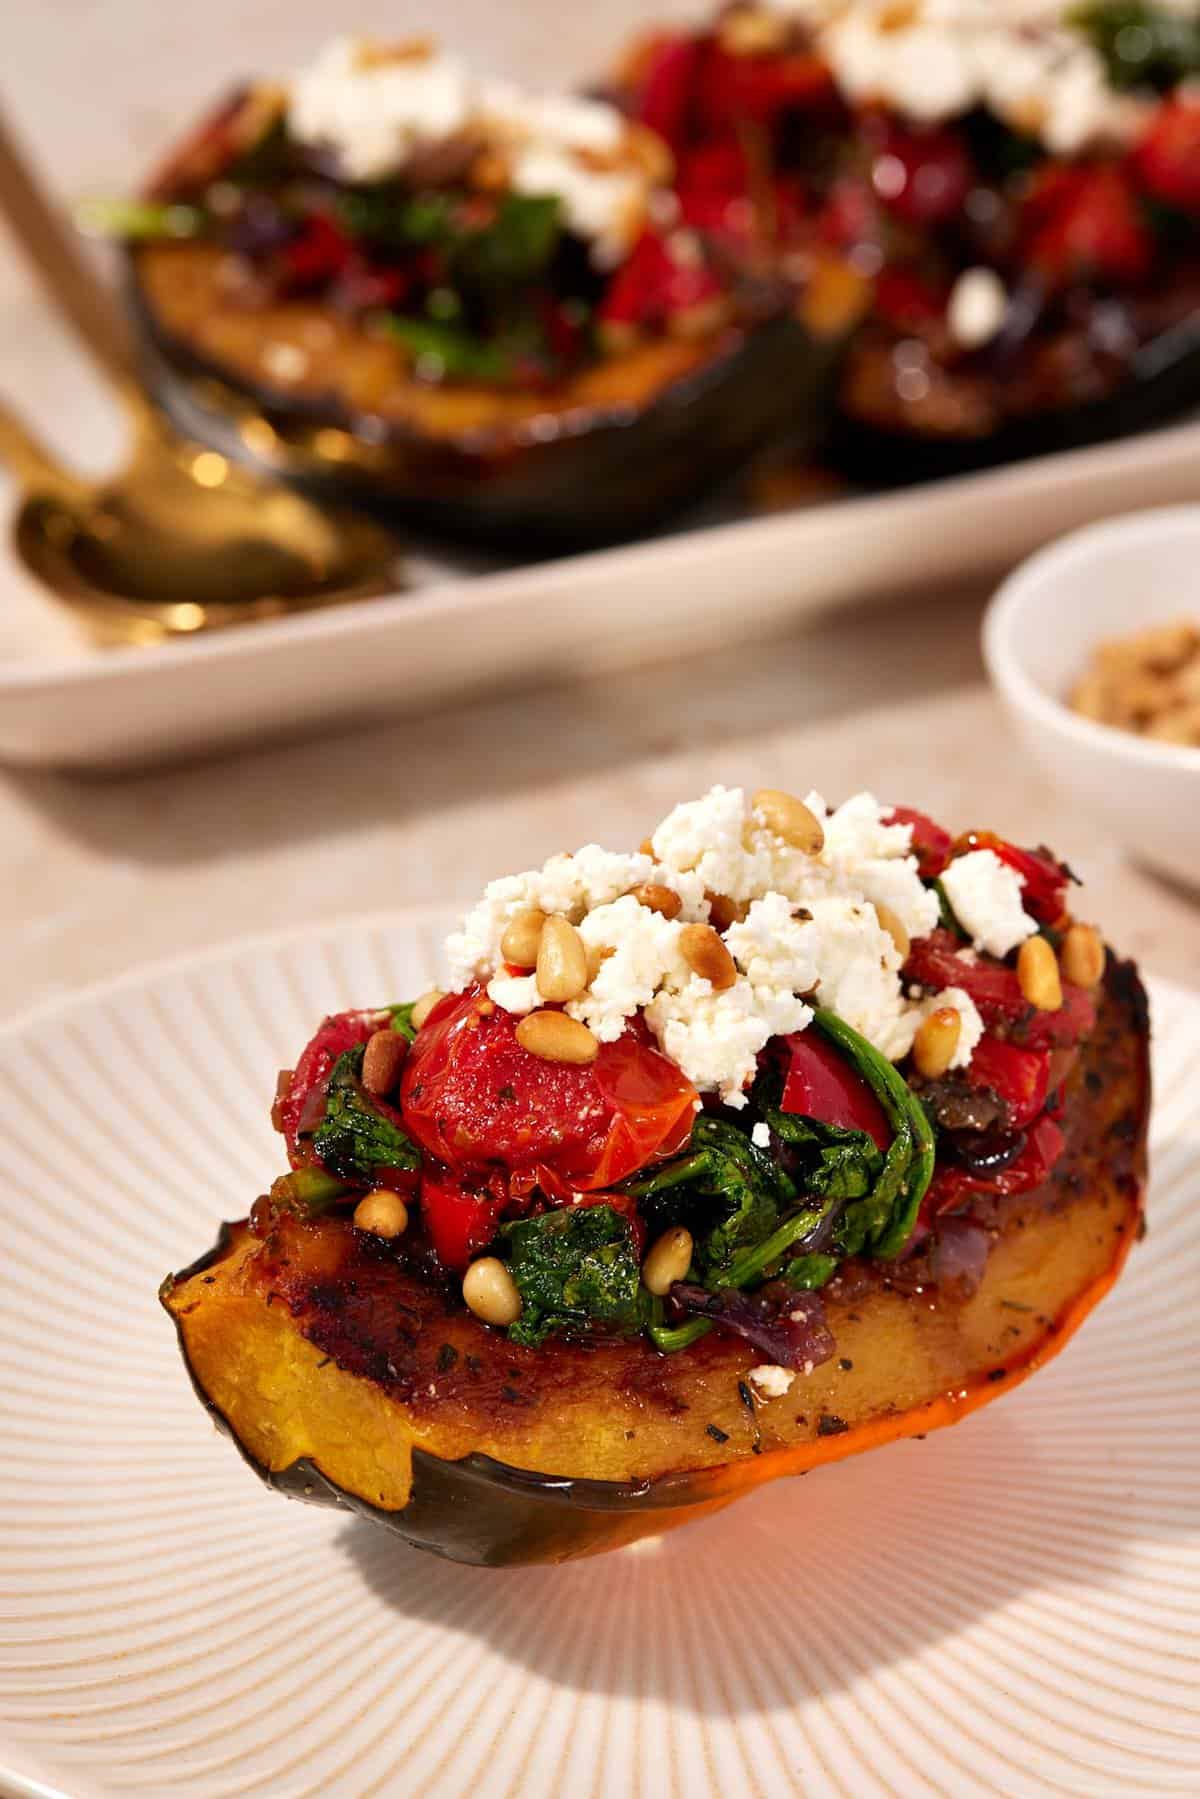 One stuffed acorn squash quarter on a plate, showing the tender squash, burst tomatoes, wilted spinach, golden brown pine nuts, and crumbled goat cheese.